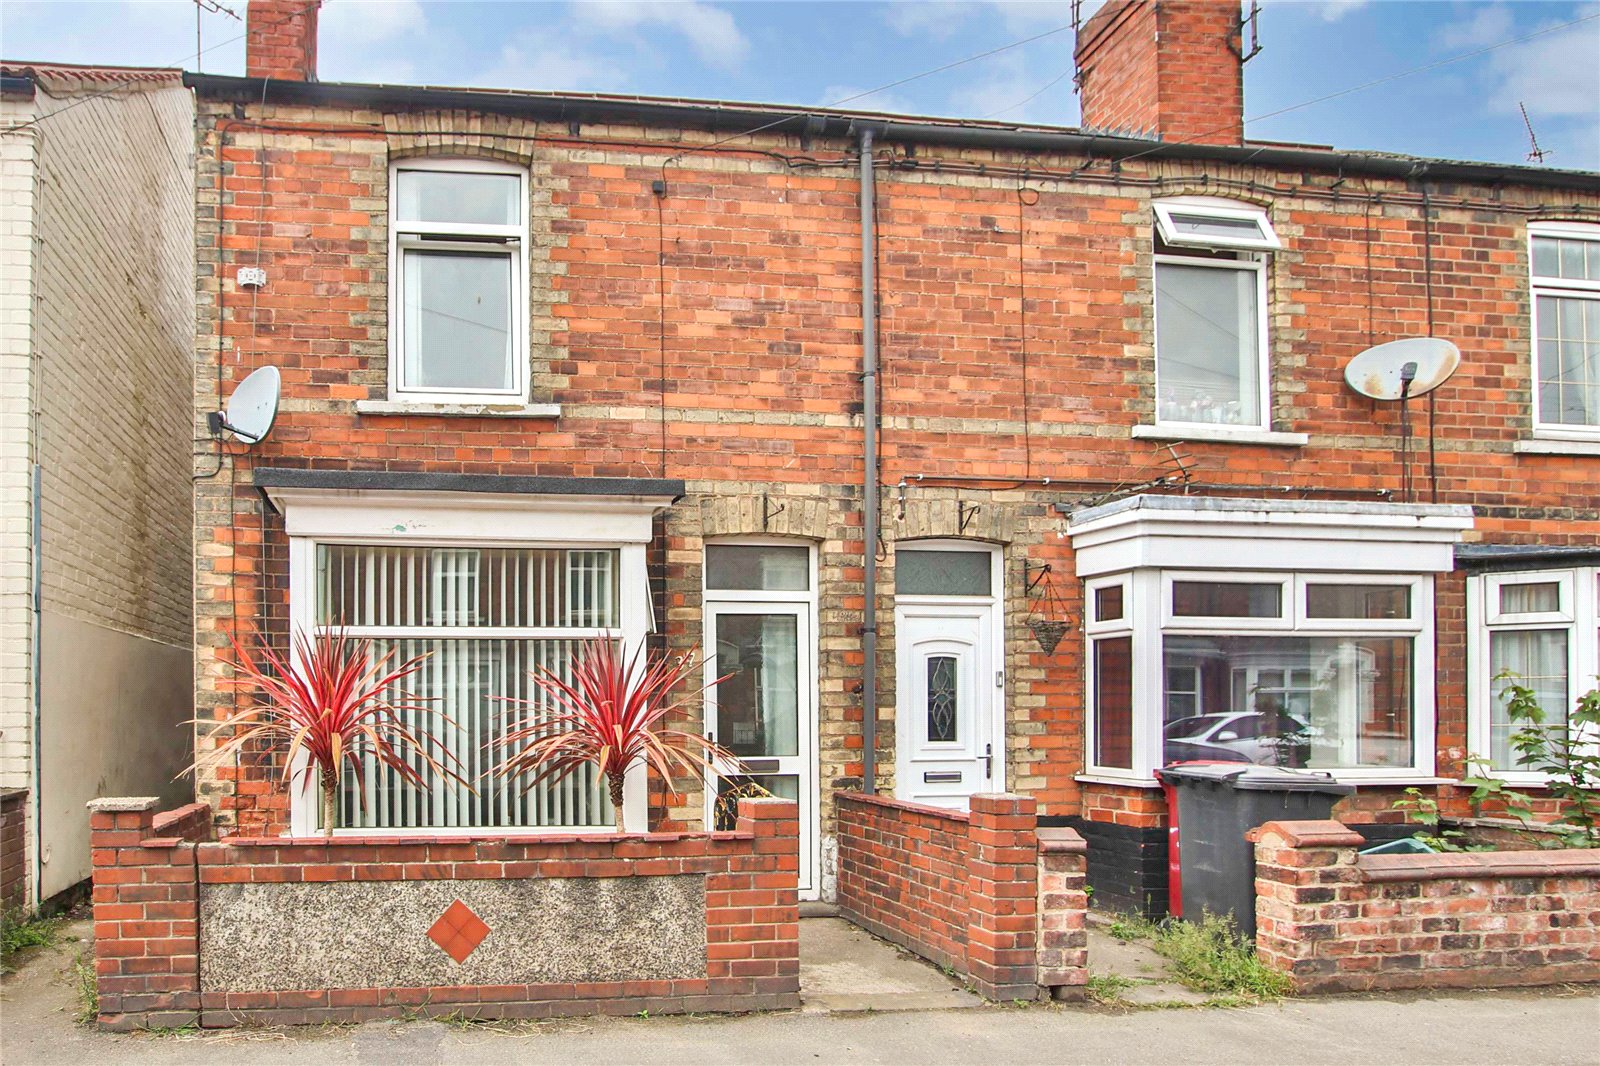 3 bed house for sale in Queens Avenue, Barton-upon-Humber, DN18